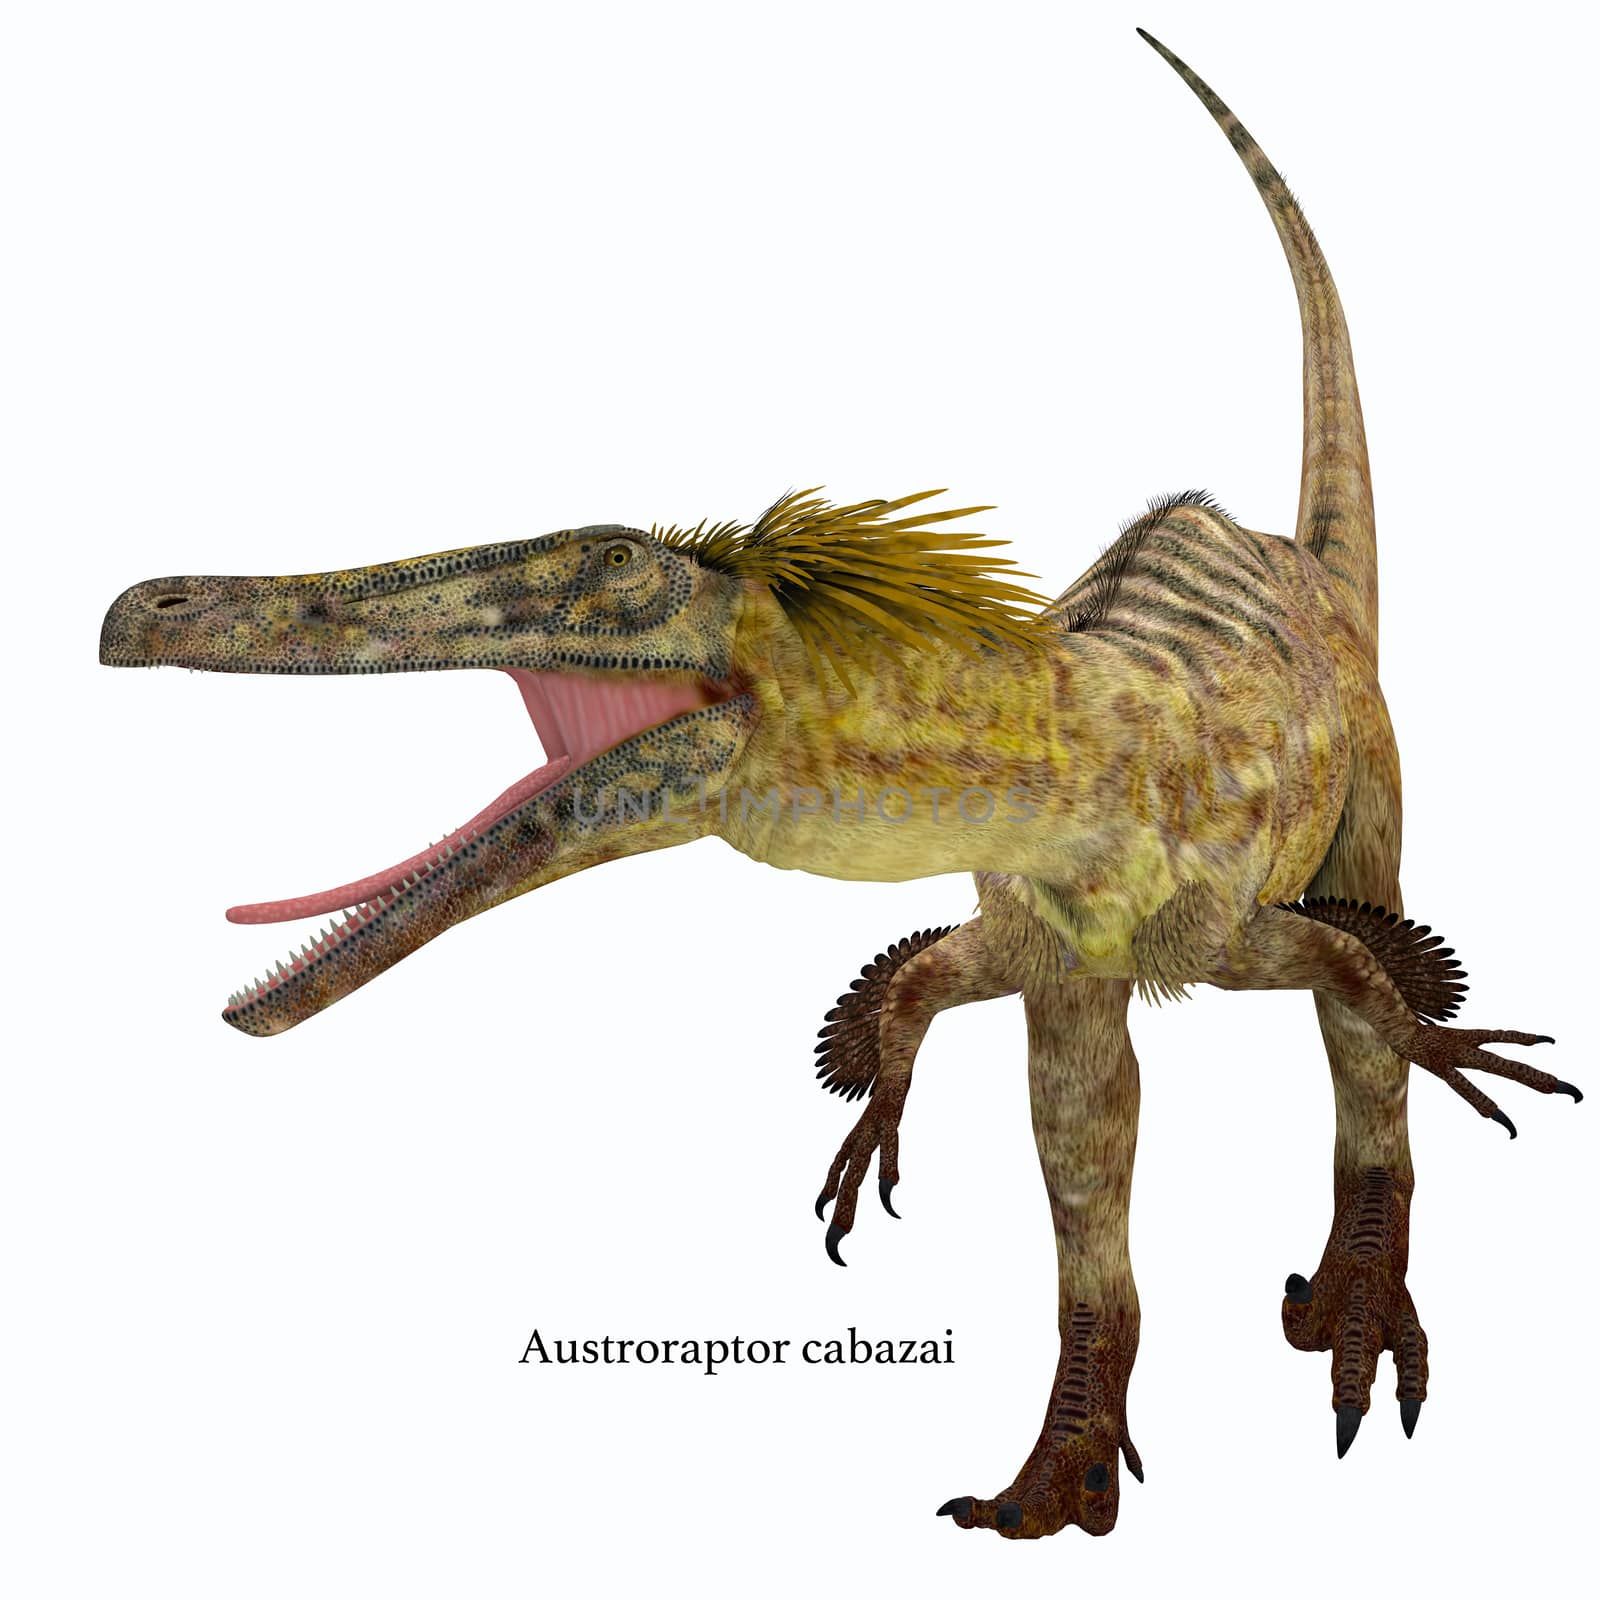 Austroraptor was a carnivorous theropod dinosaur that lived in Argentina in the Cretaceous Period.